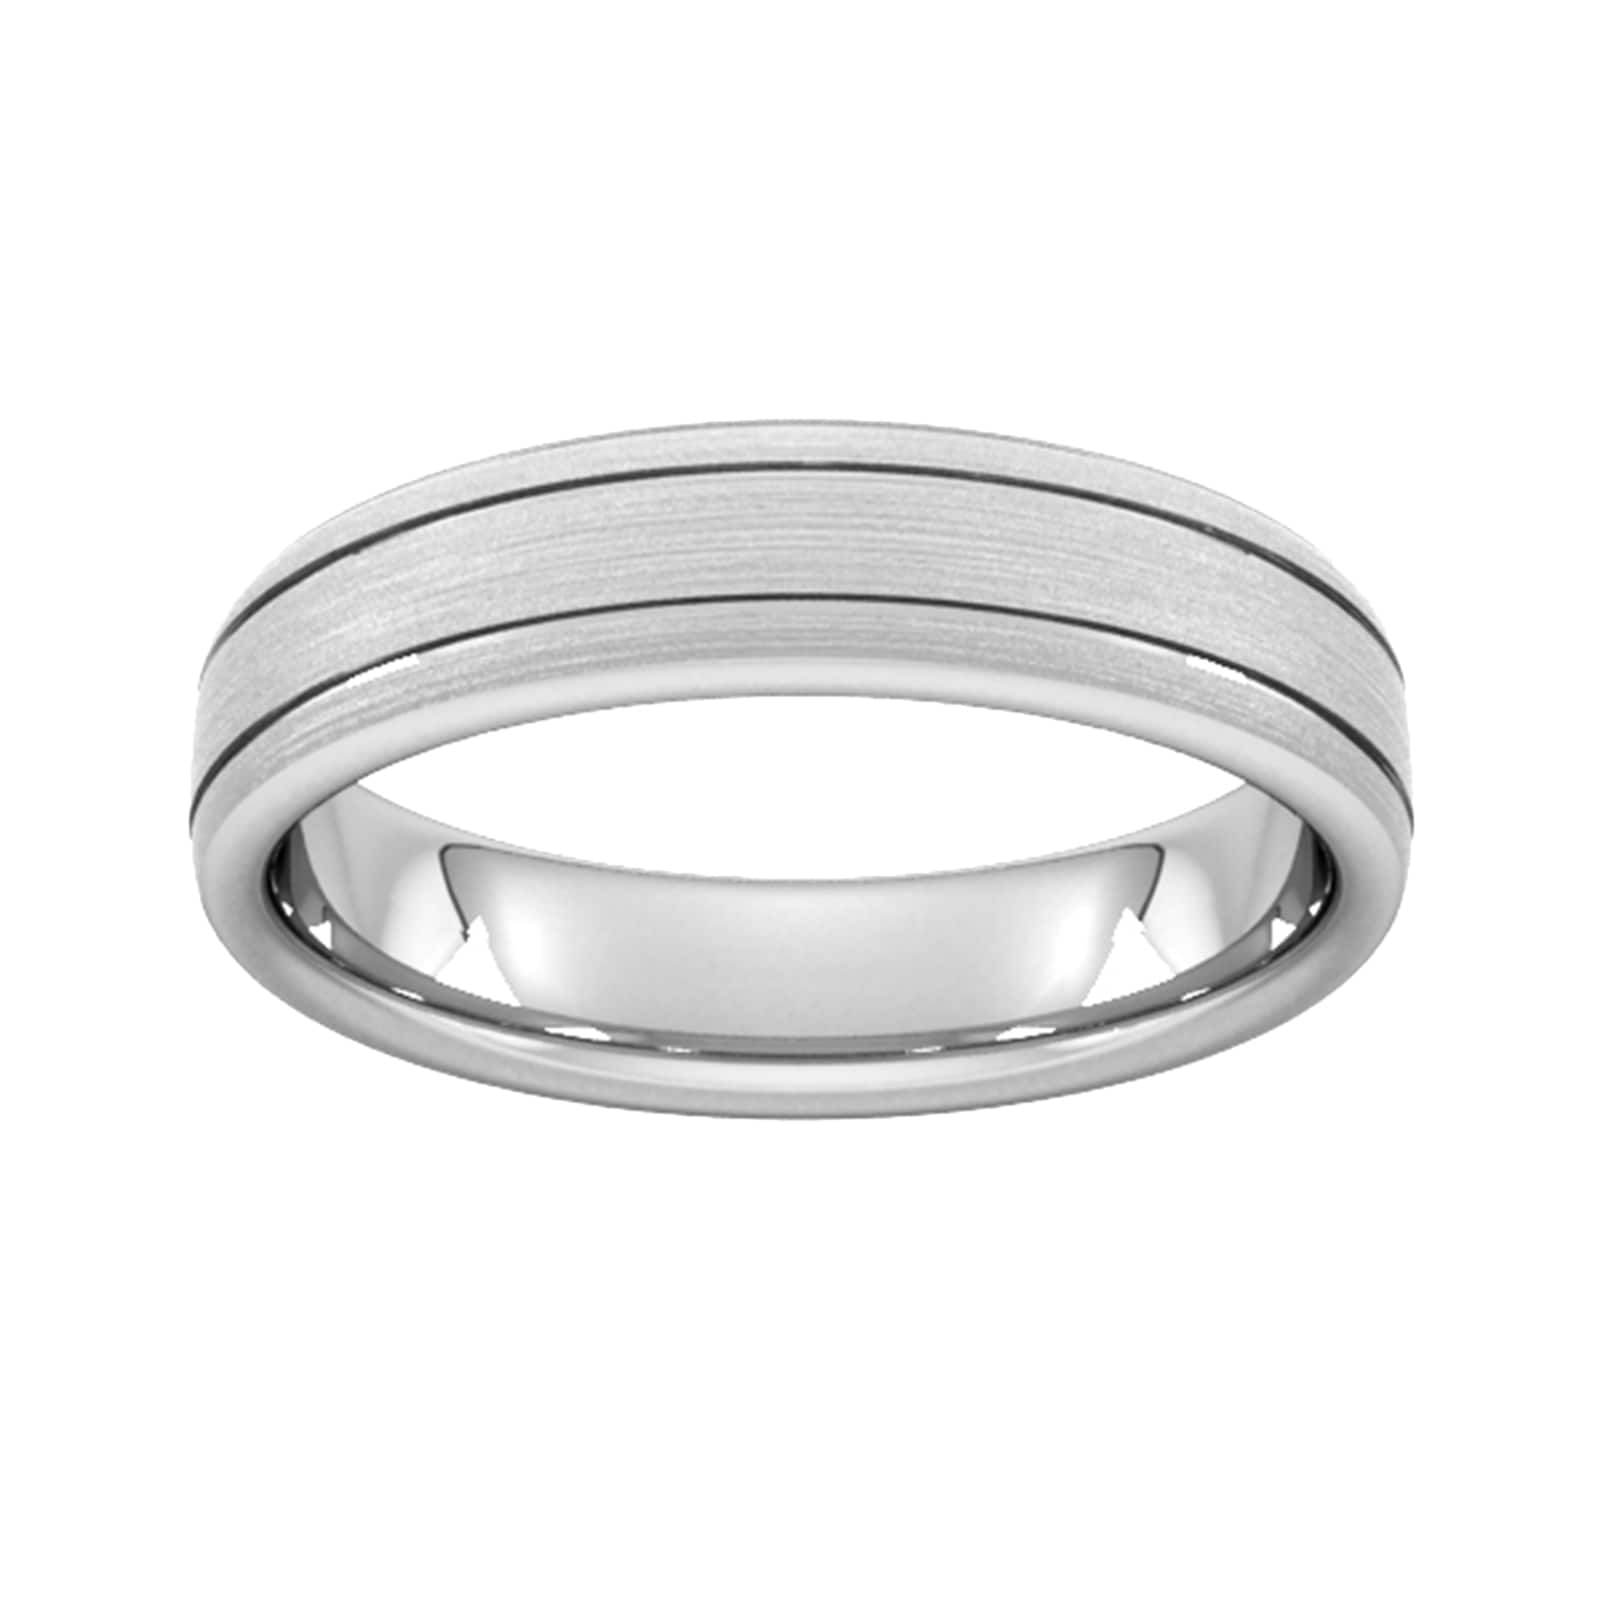 5mm D Shape Heavy Matt Finish With Double Grooves Wedding Ring In 9 Carat White Gold - Ring Size R